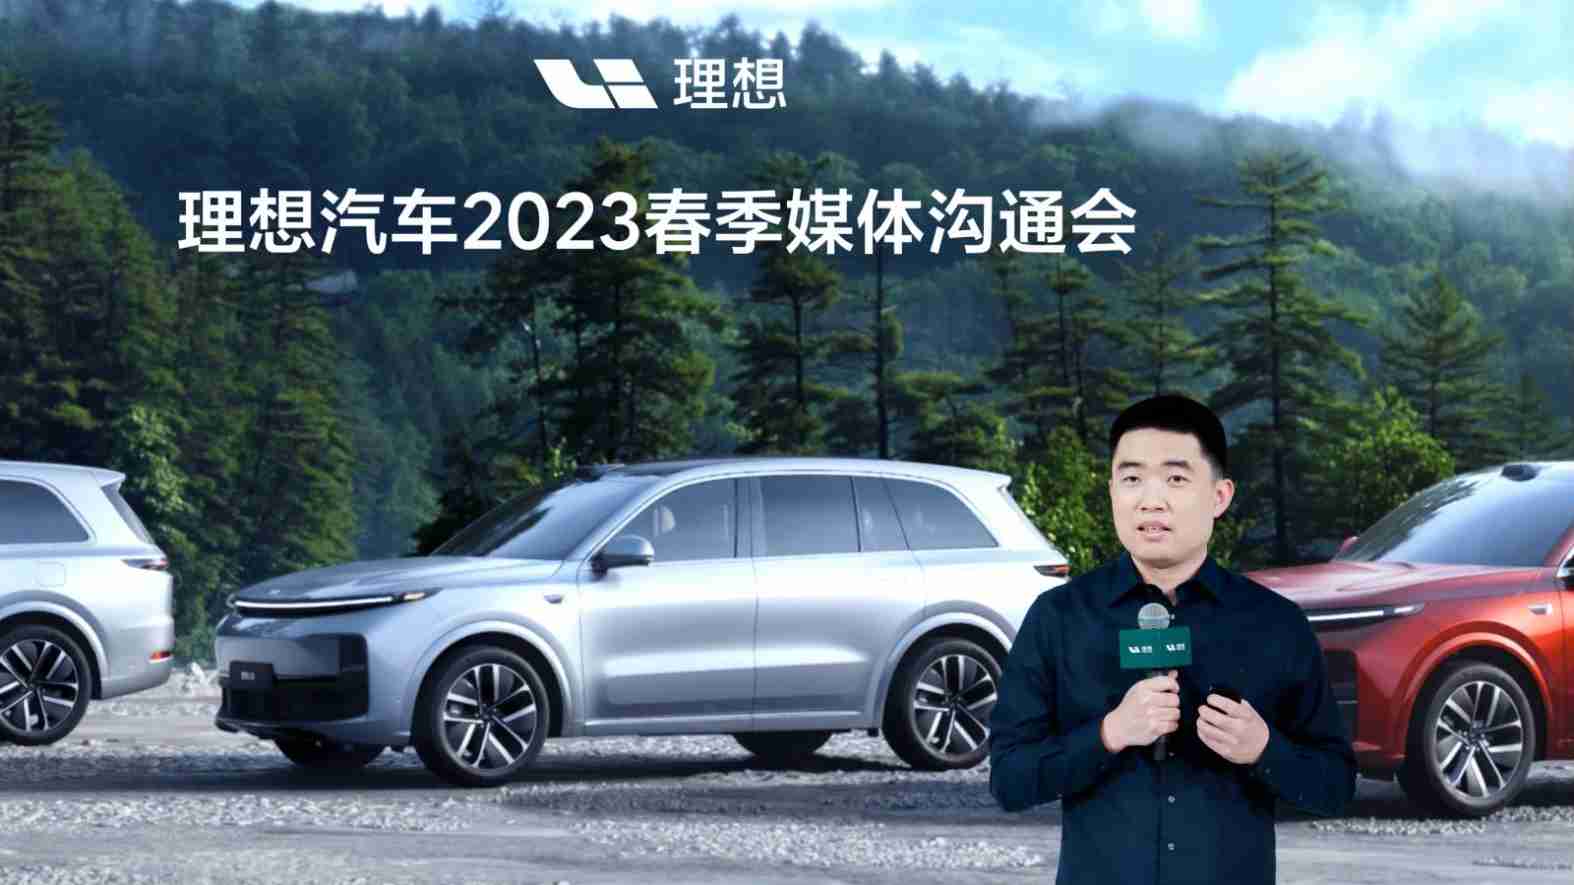 Li Xiang: Starting from now, All in on autonomous driving, and range extension will continue until 2030.